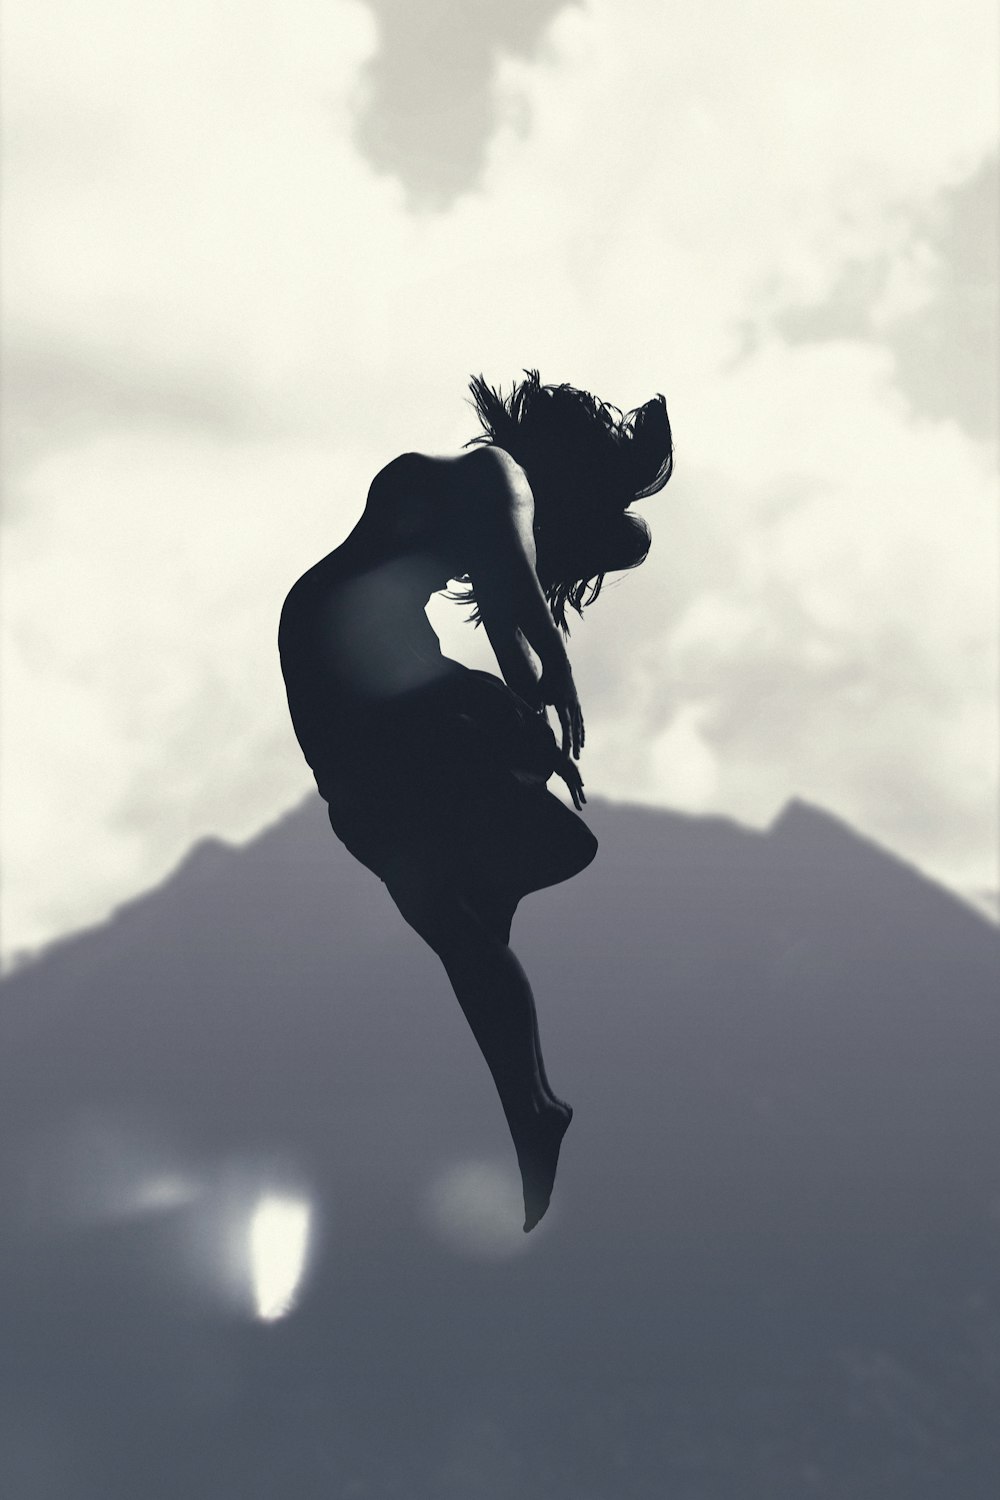 silhouette of person jumping in mid-air during daytime